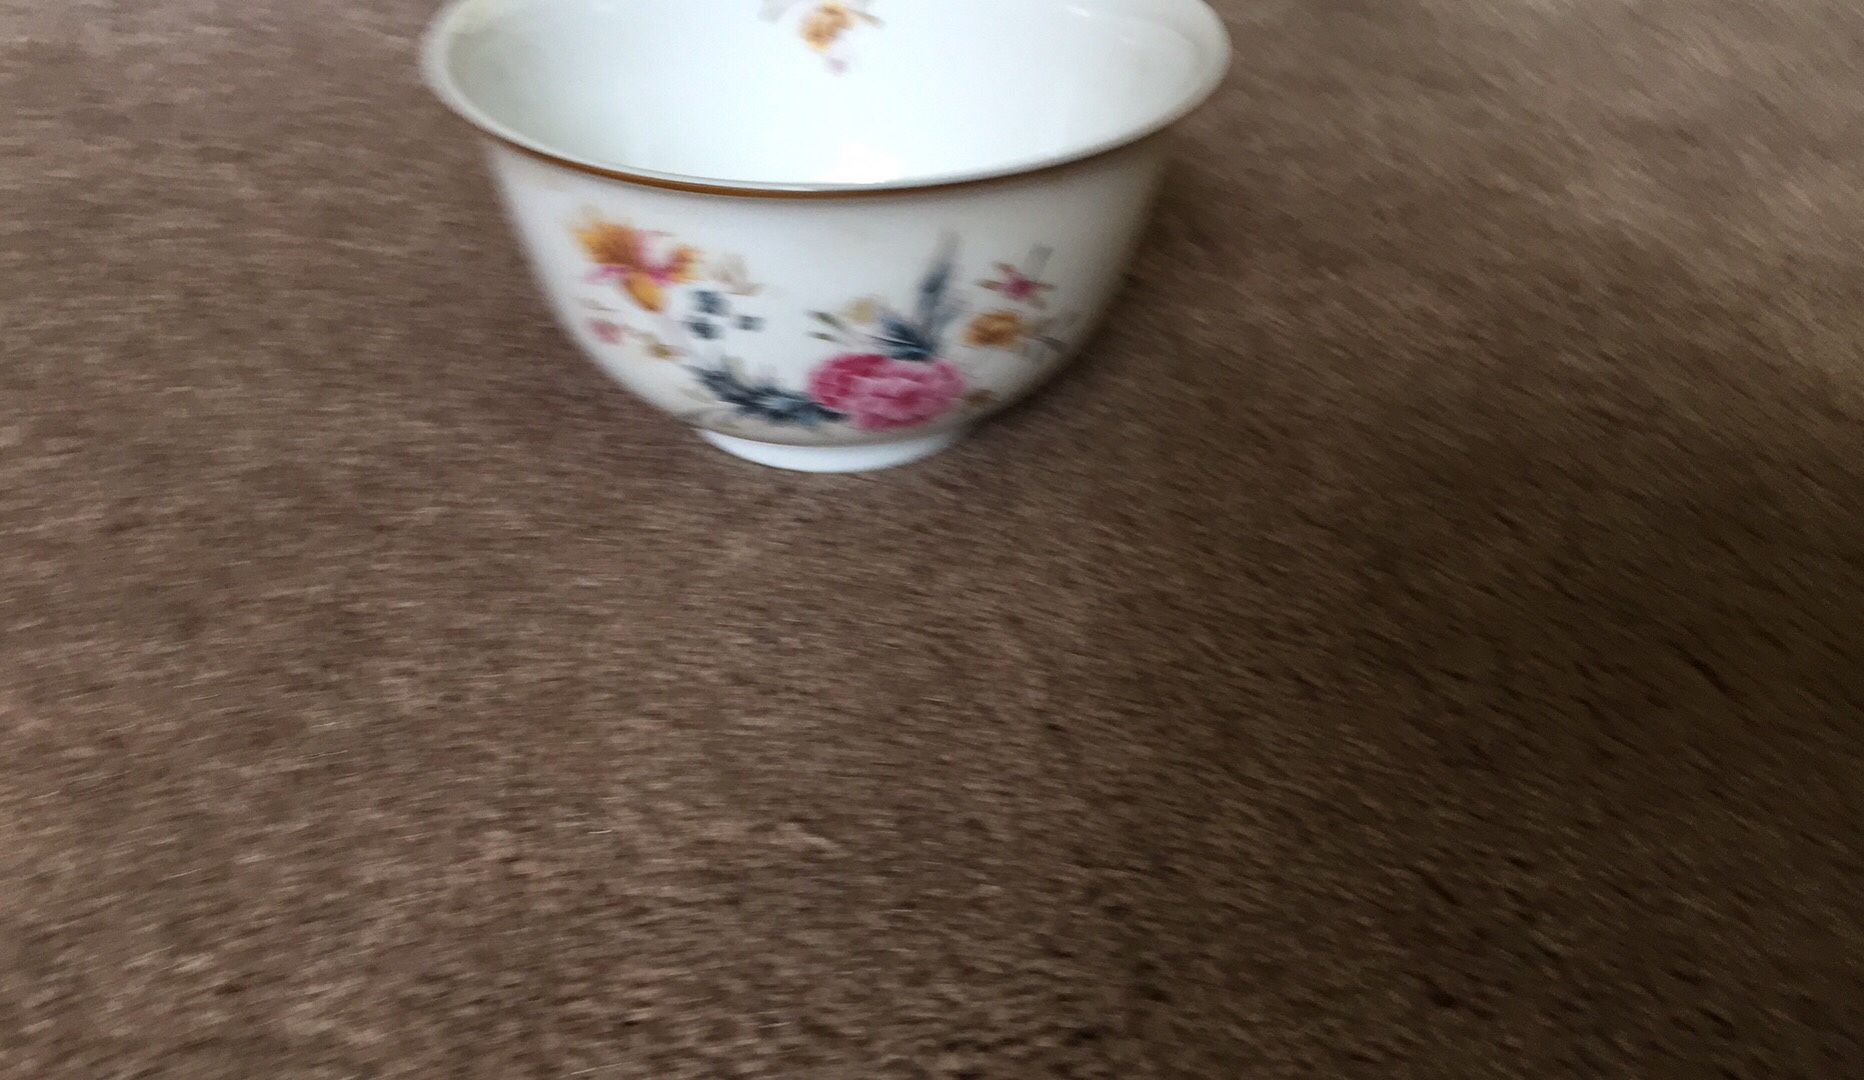 Antique glass bowl from Avon